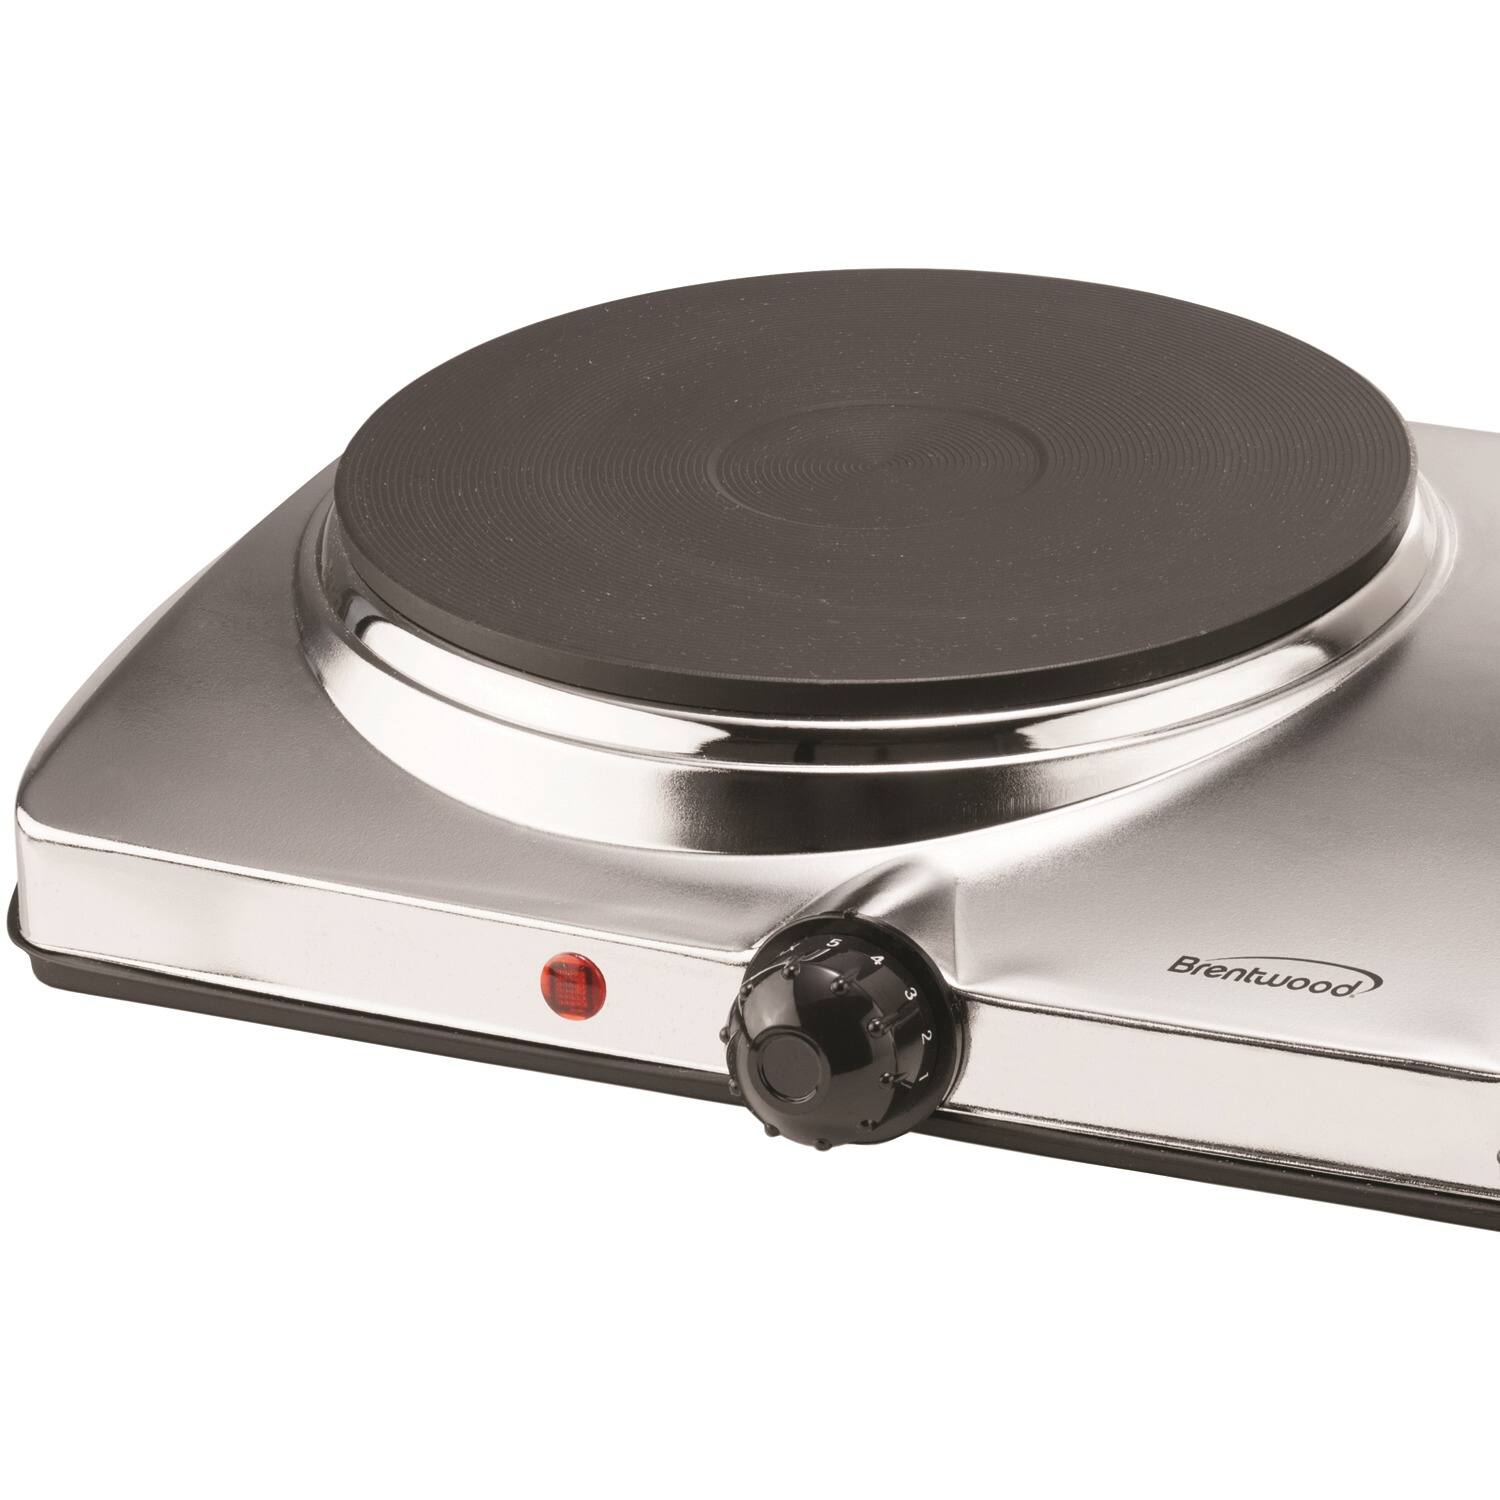 Brentwood Electric Double Hot Plate